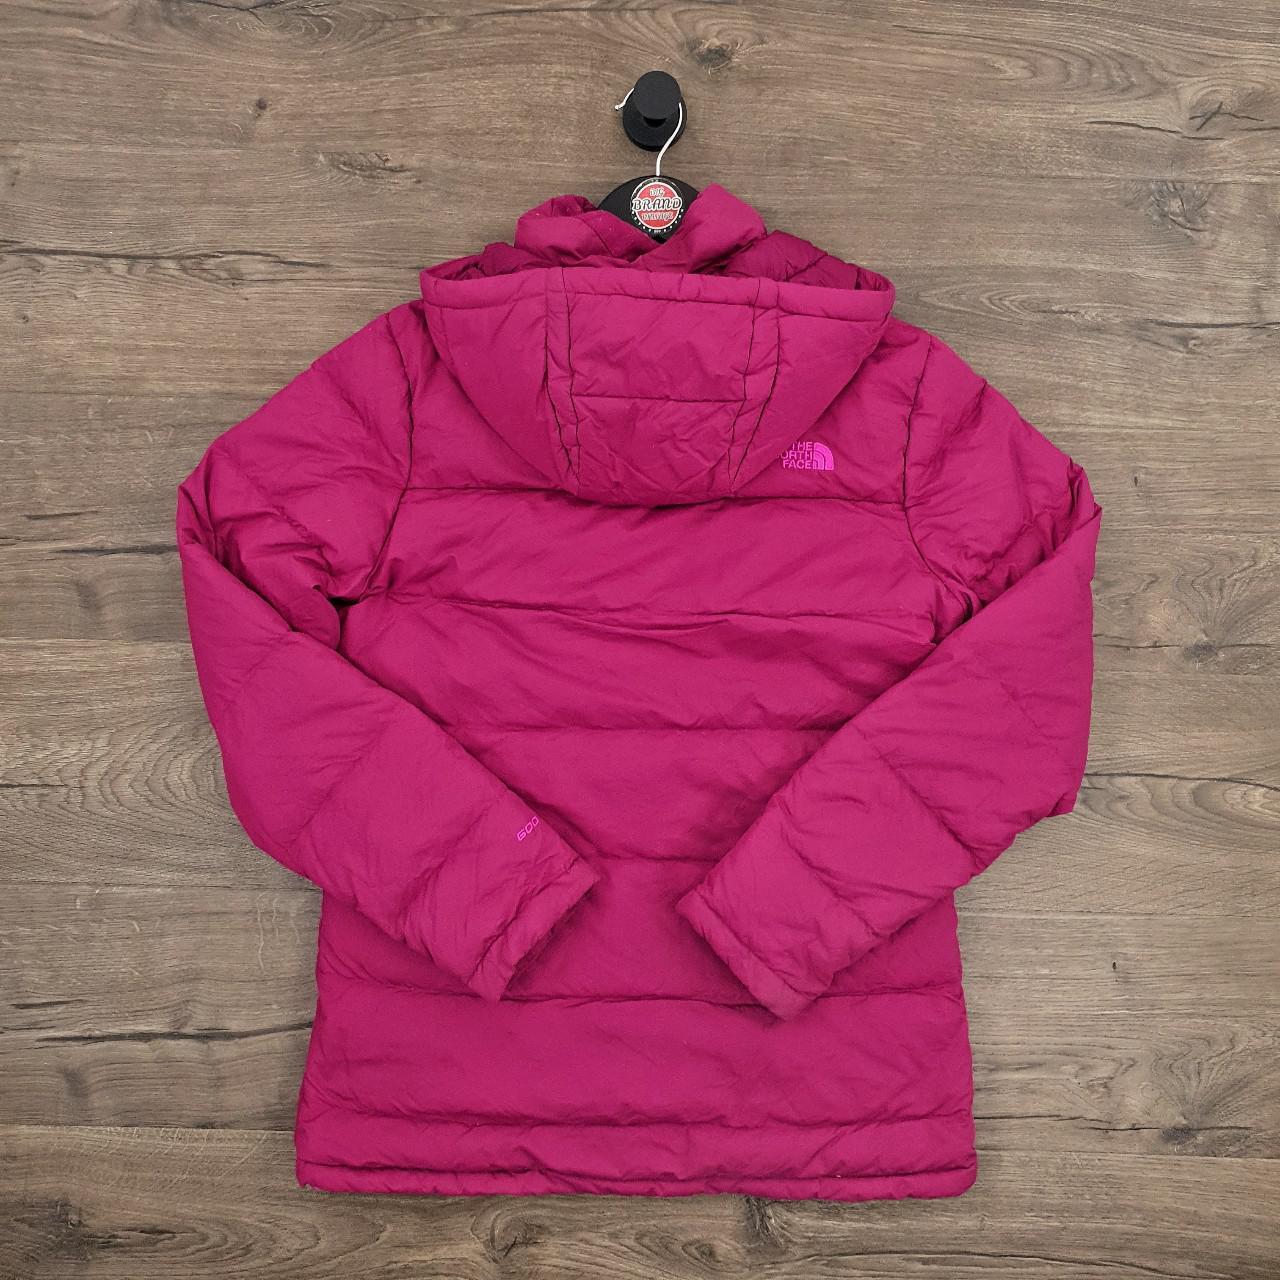 🔎 Pink hooded the north face 600 puffer jacket... - Depop